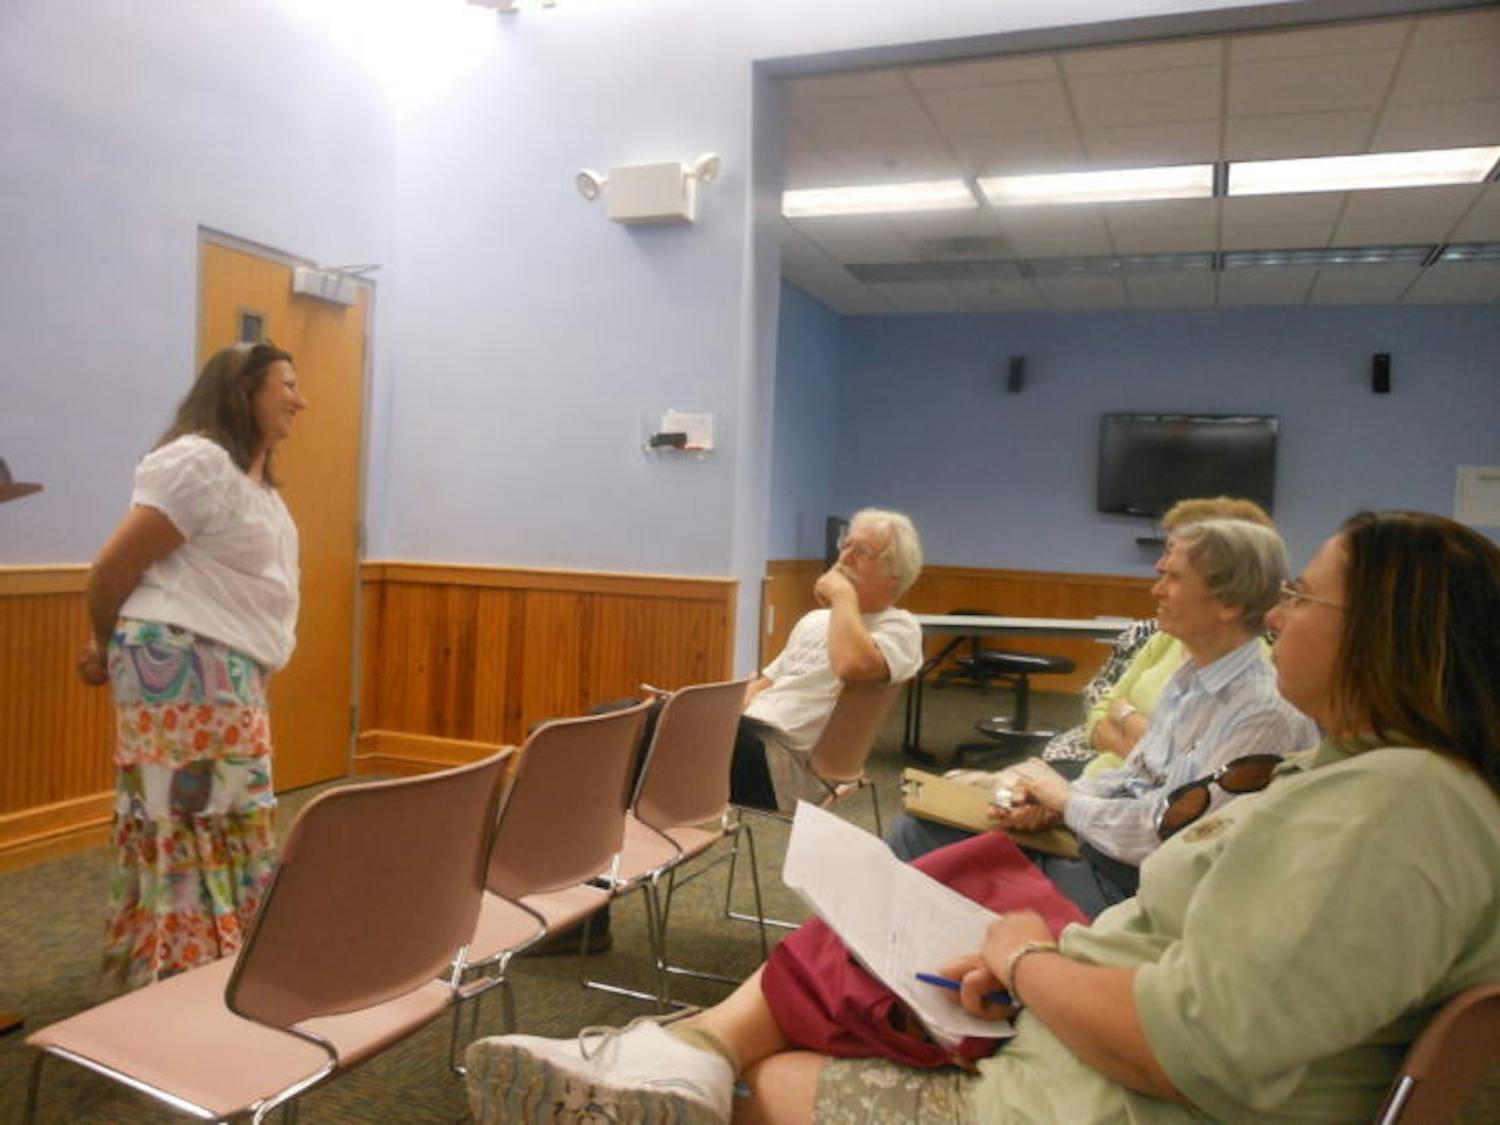 Mary Glazer may not consider herself a writer, but her presentation at the Writers’ Alliance of Gainesville Meeting Sunday showcased how to start a new chapter in your life and with writing.
&nbsp;